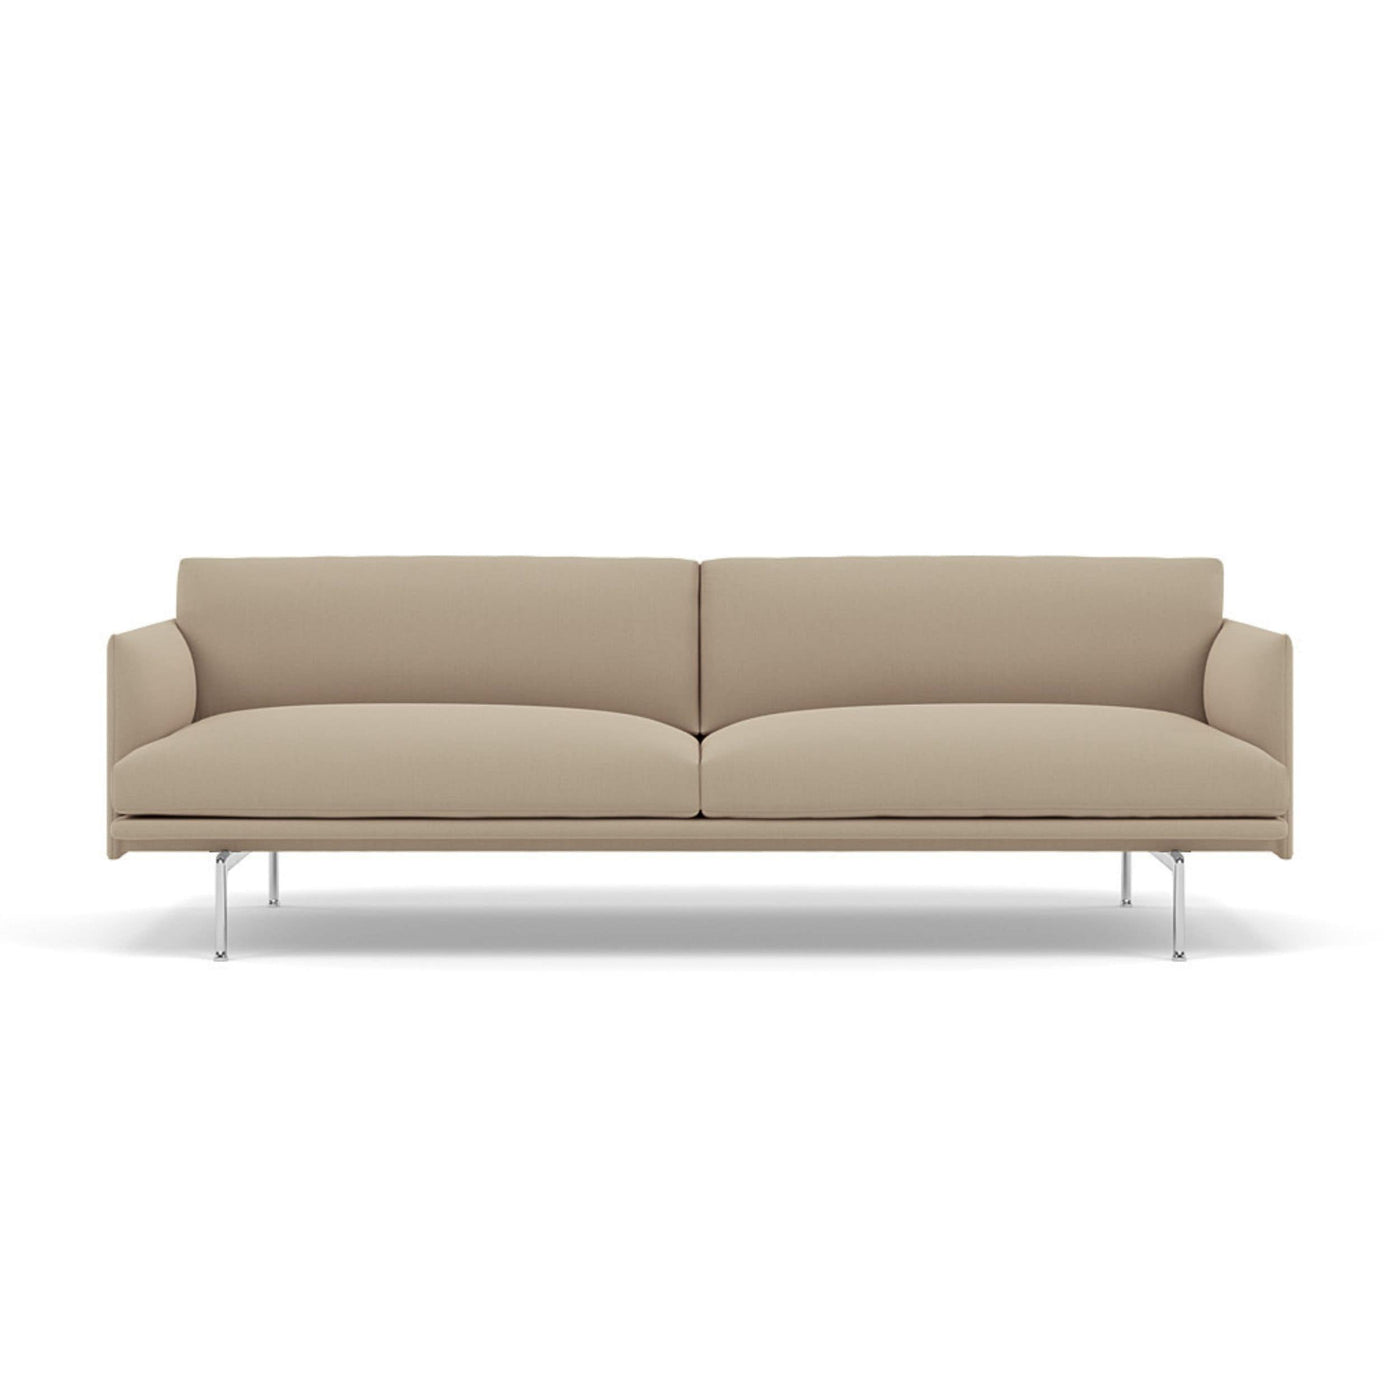 Muuto outline 3 seater sofa with polished aluminium legs. Made to order from someday designs. #colour_clara-248